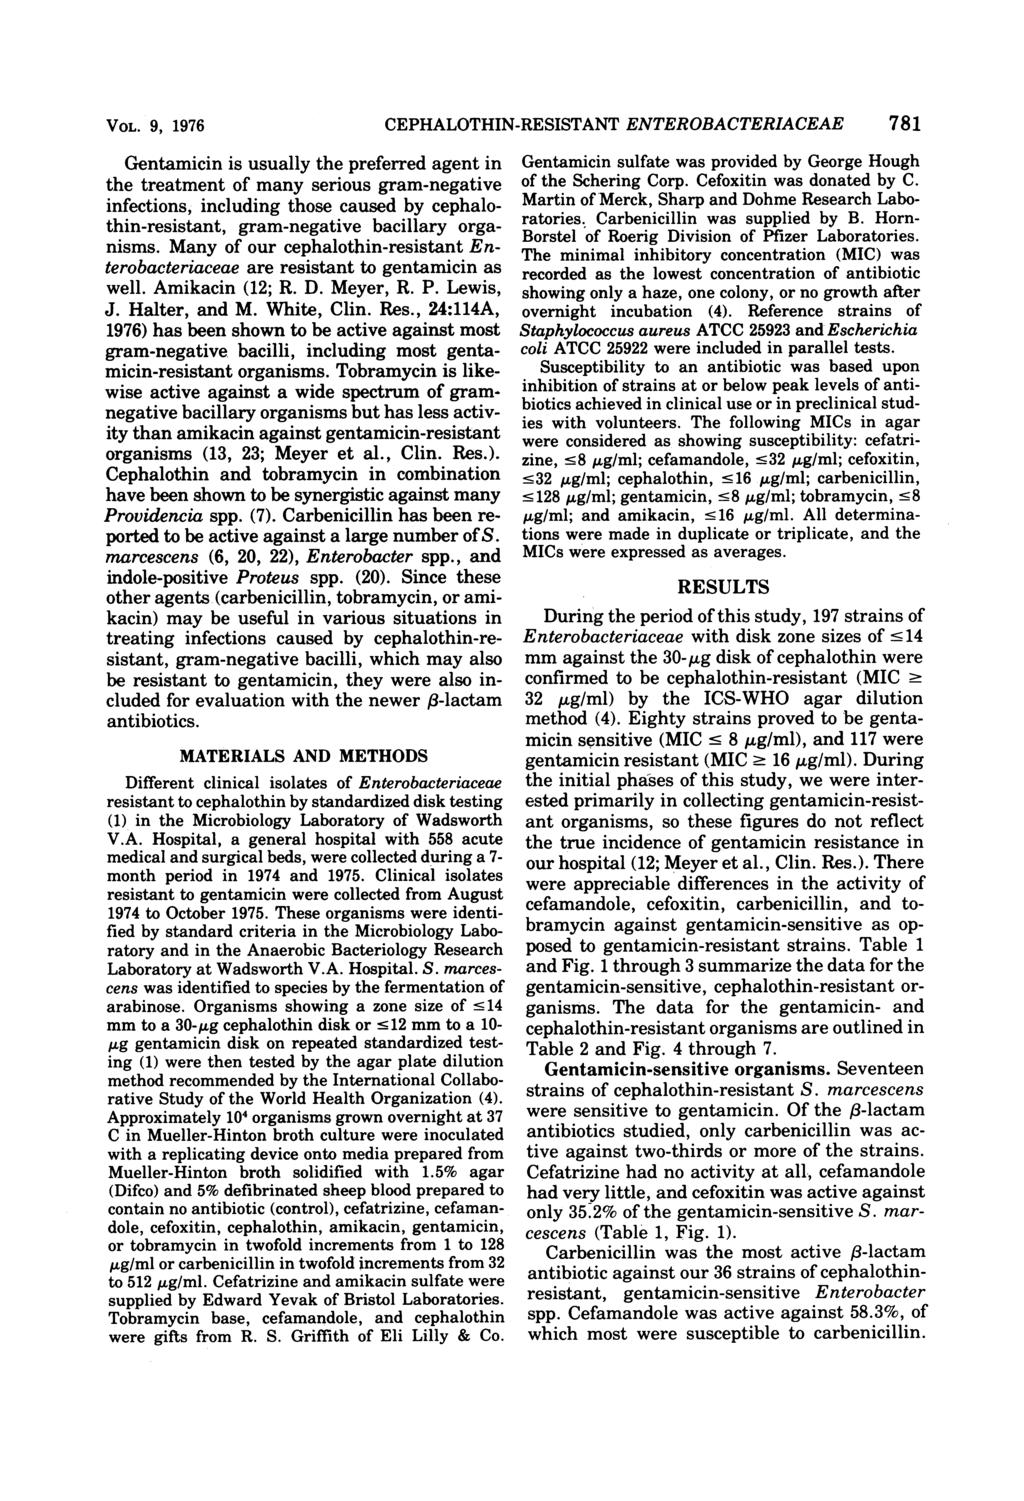 VOL. 9, 1976 CEPHALOTHN-RESSTANT ENTEROBACTERACEAE 781 Gentamicin is usually the preferred agent in the treatment of many serious gram-negative infections, including those caused by